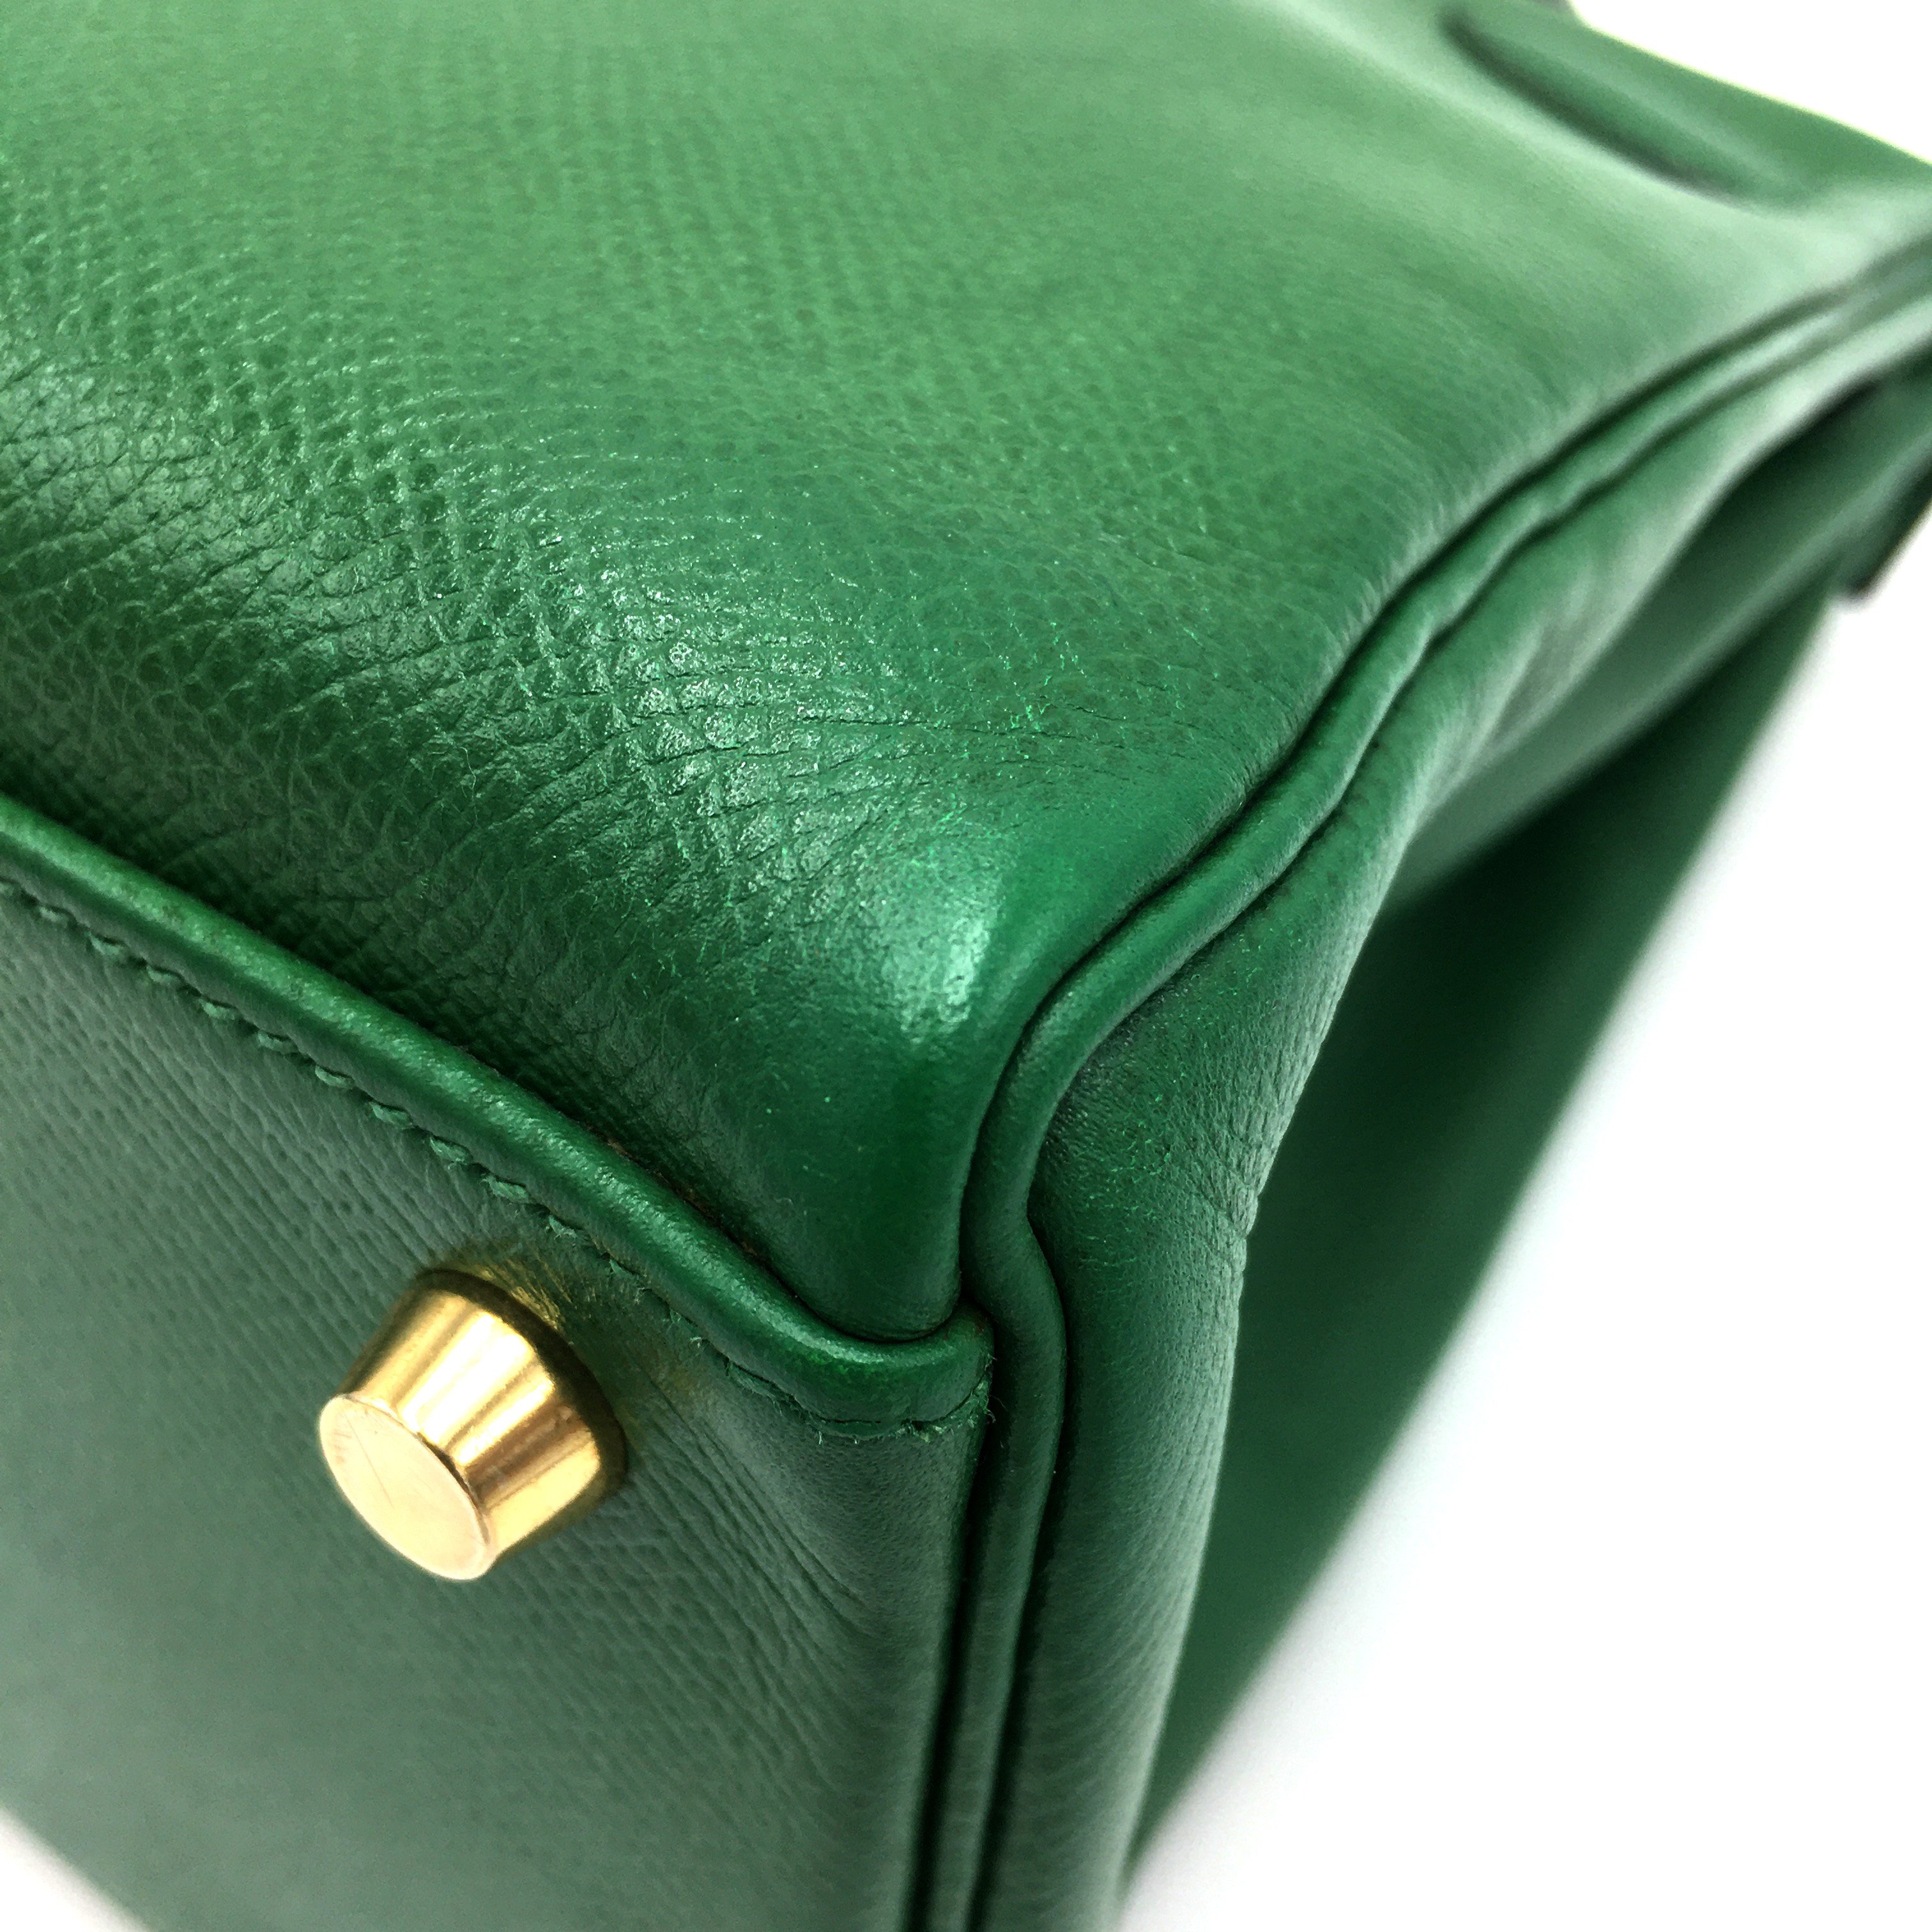 Hermès - Authenticated Kelly 32 Handbag - Leather Green Plain for Women, Very Good Condition